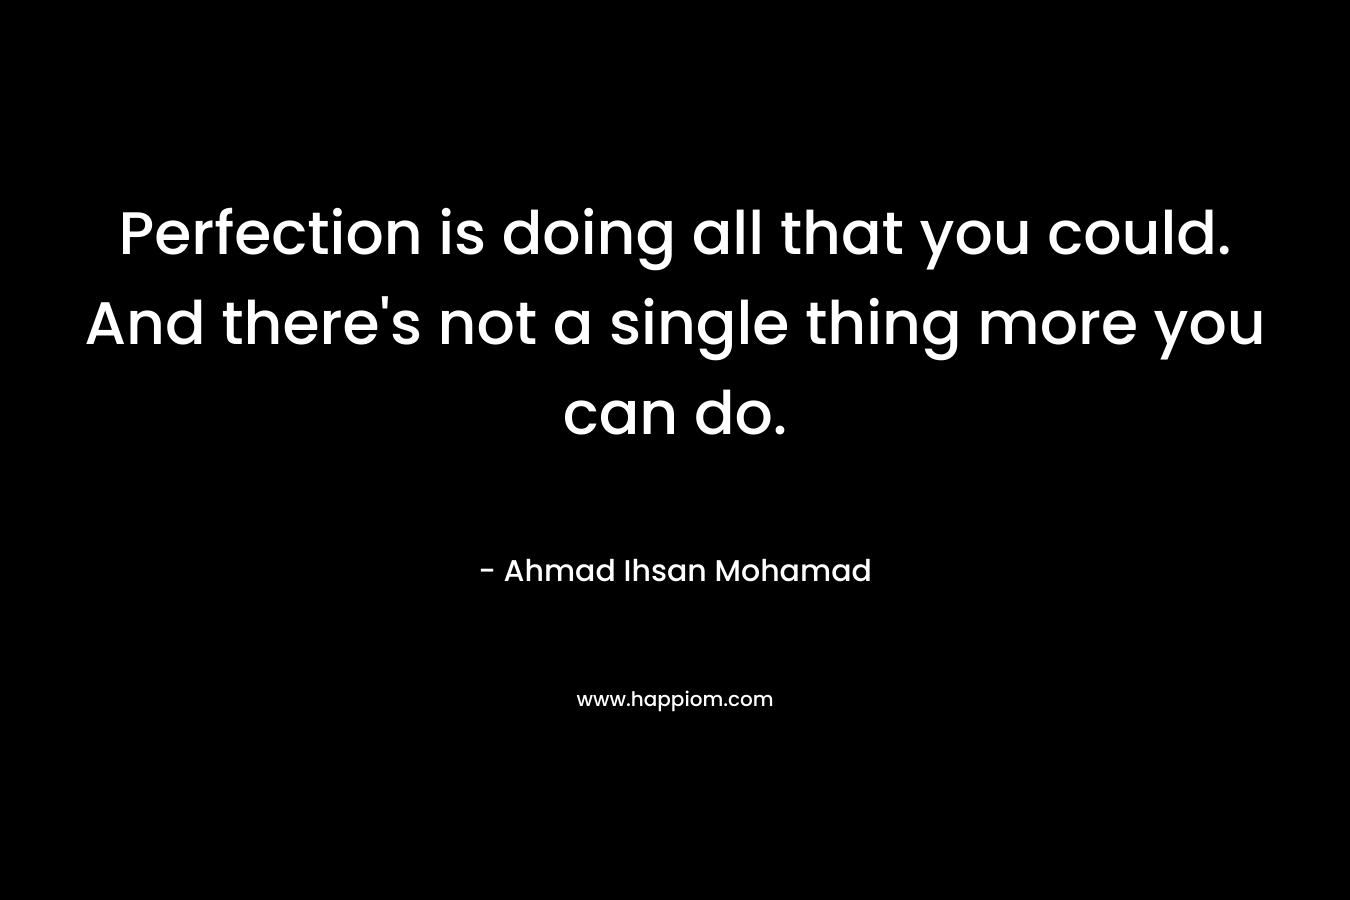 Perfection is doing all that you could. And there’s not a single thing more you can do. – Ahmad Ihsan Mohamad